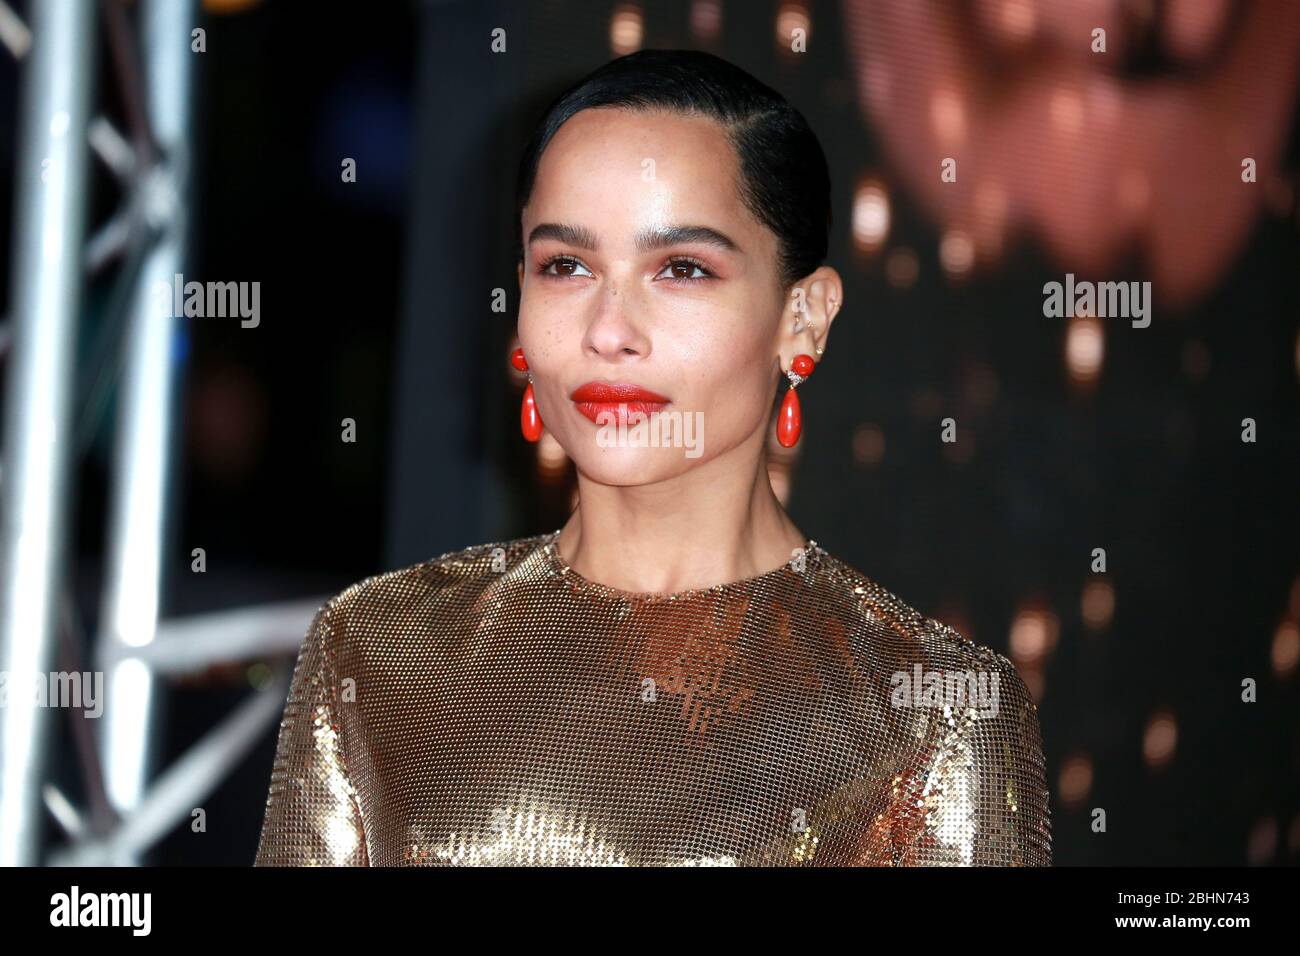 Zoe Kravitz Attends The Ee British Academy Film Awards 2020 At Royal